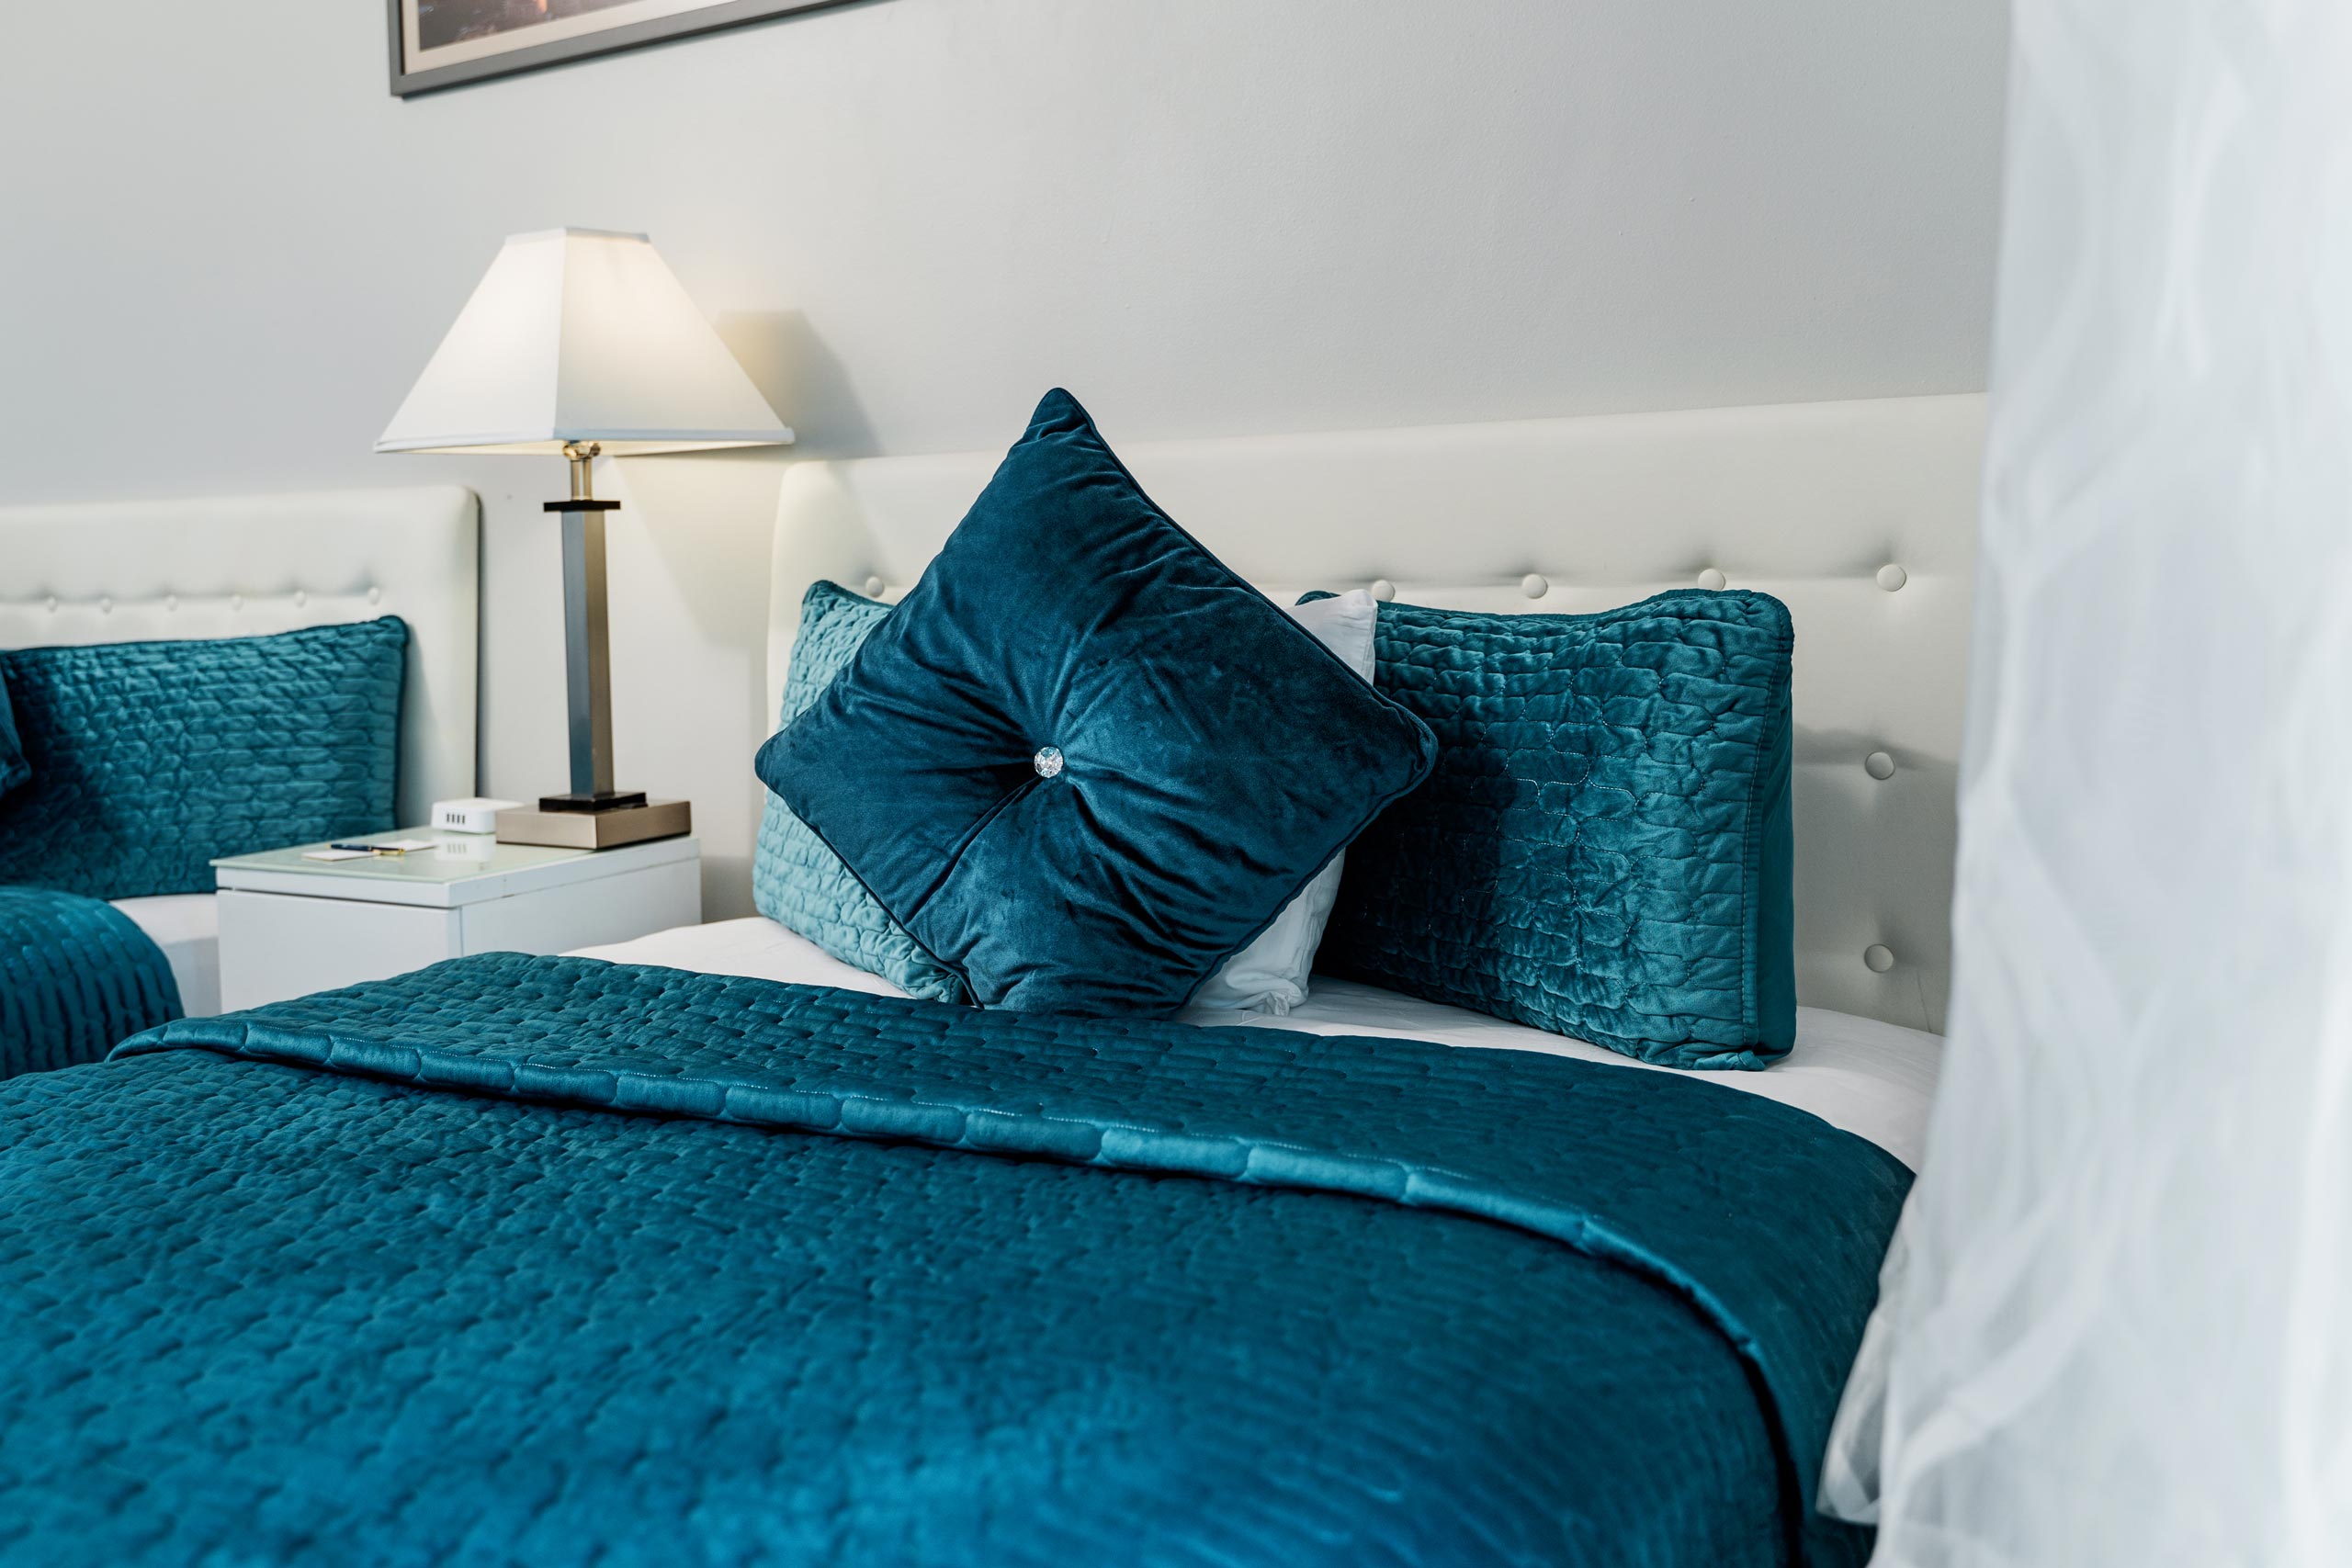 Blue decorative pillows and lamp